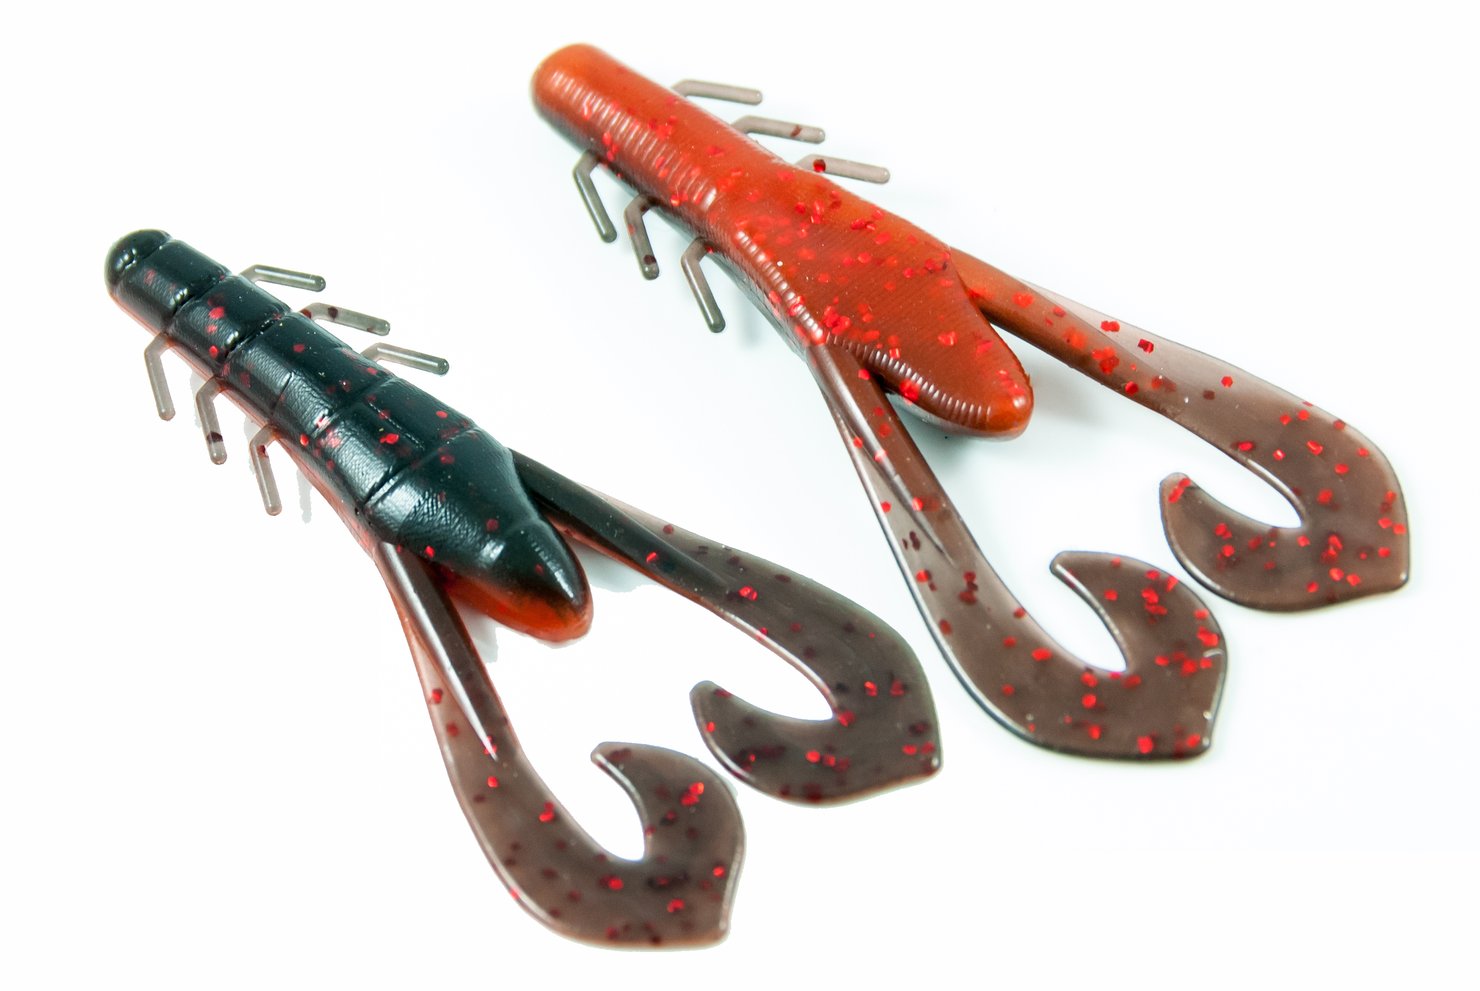 Shop The Viewer's Choice Winning Fishing Worms, Craws & Creatures